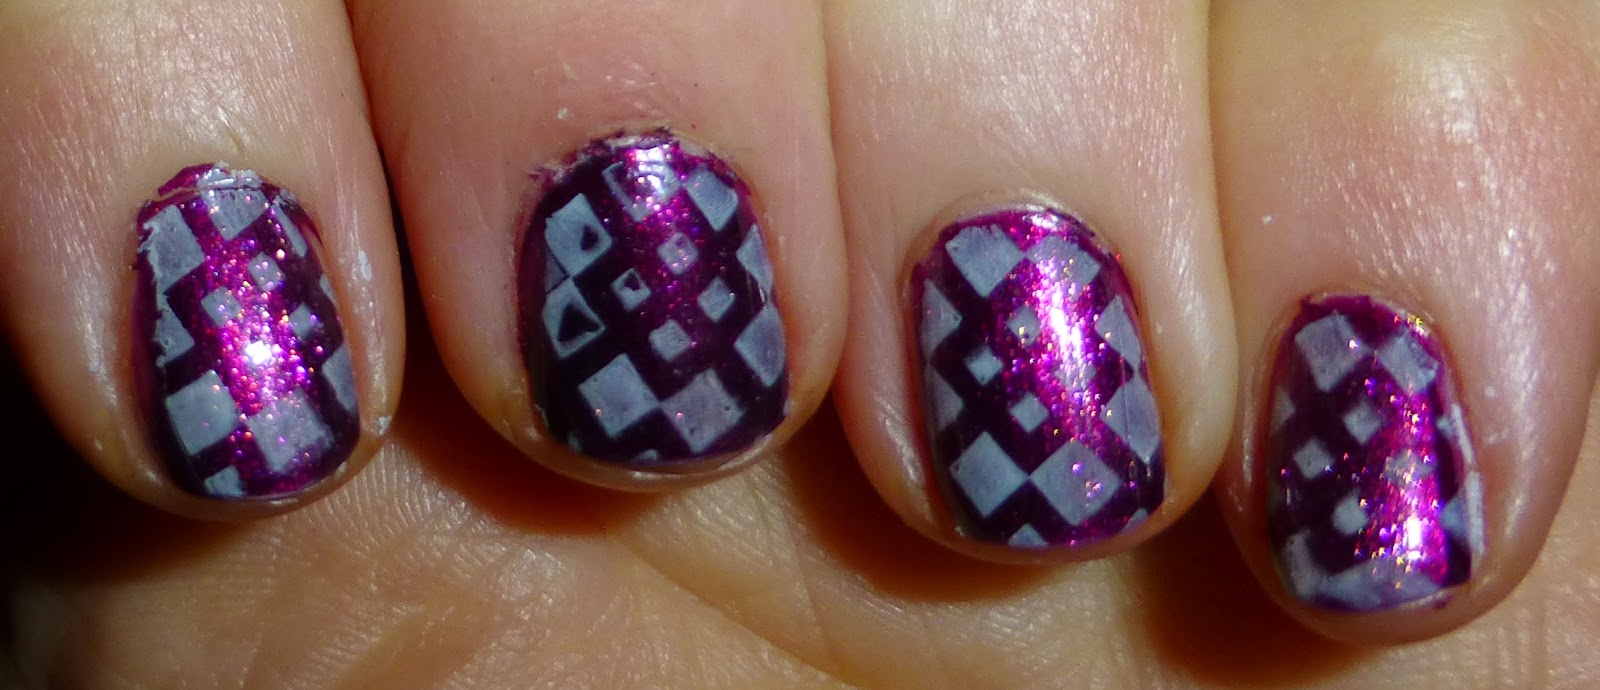 IndieAna- In Search of the HolyGrail: Stamped Nails